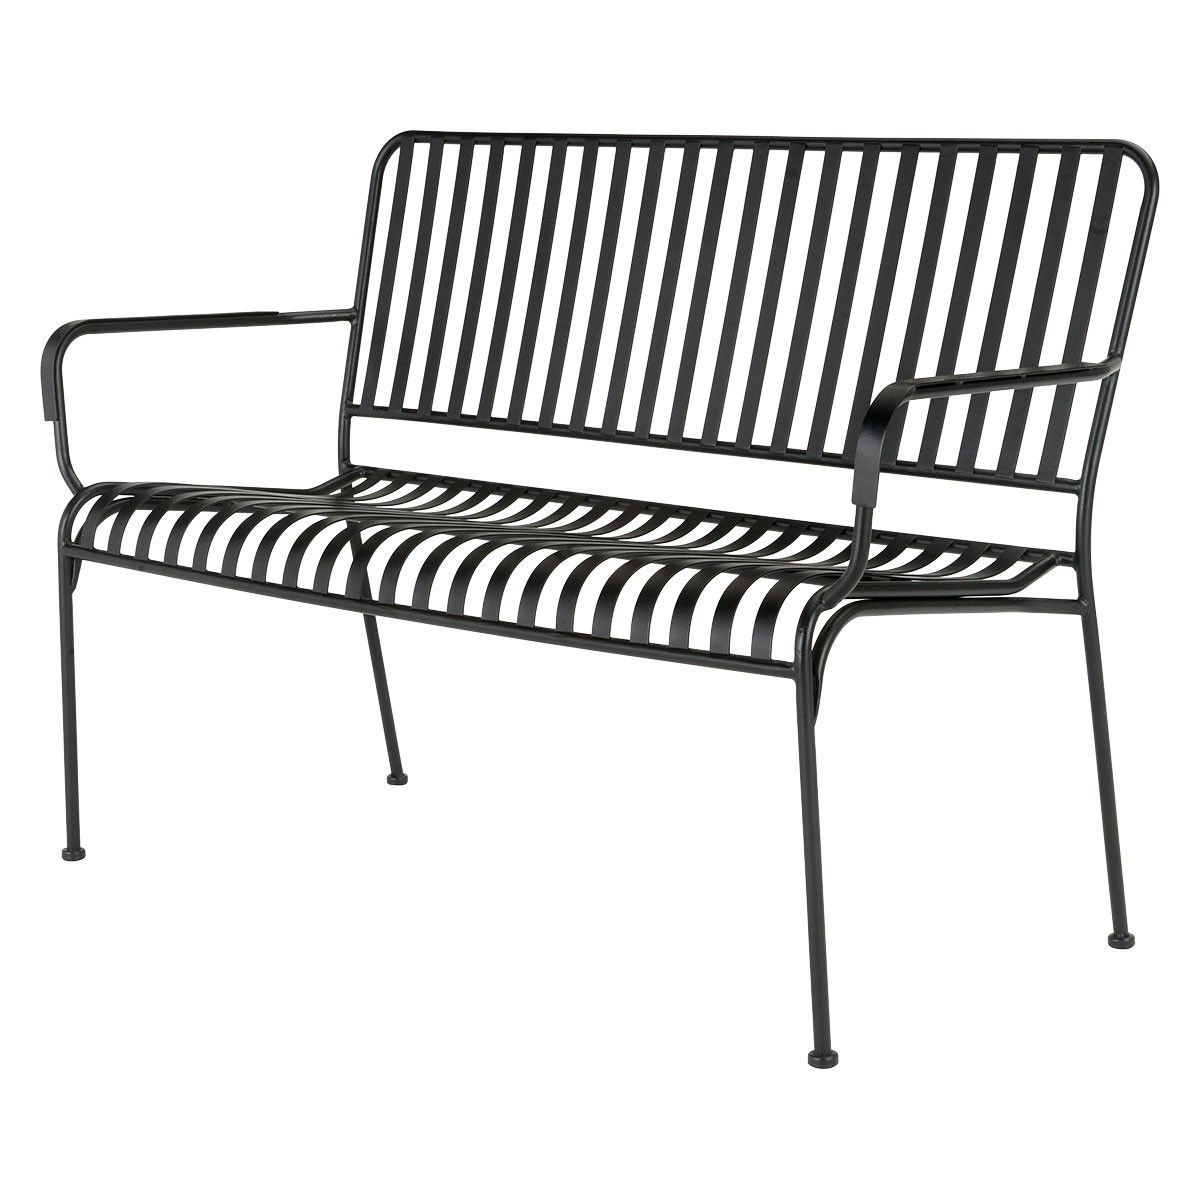 Alvah Slatted Cast Iron And Tubular Steel Garden Benches Pertaining To Most Recently Released Indu Black Metal Slatted Garden Bench With Arms (View 21 of 30)